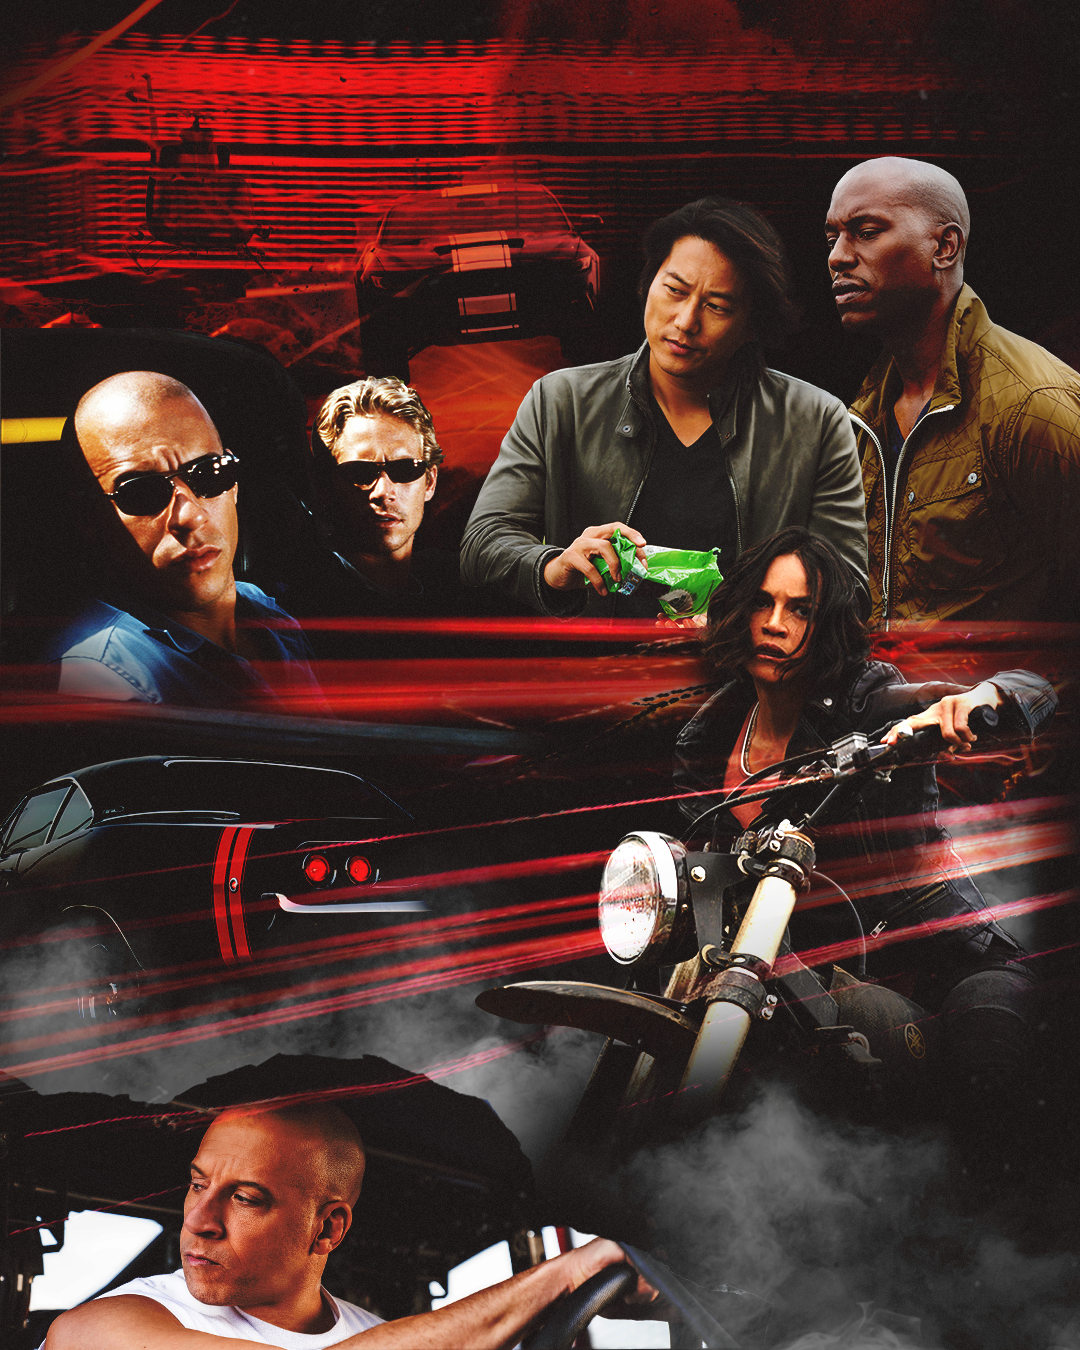 I binged all 10 'Fast & Furious' movies. It was a messy, heartfelt love  letter to our communities